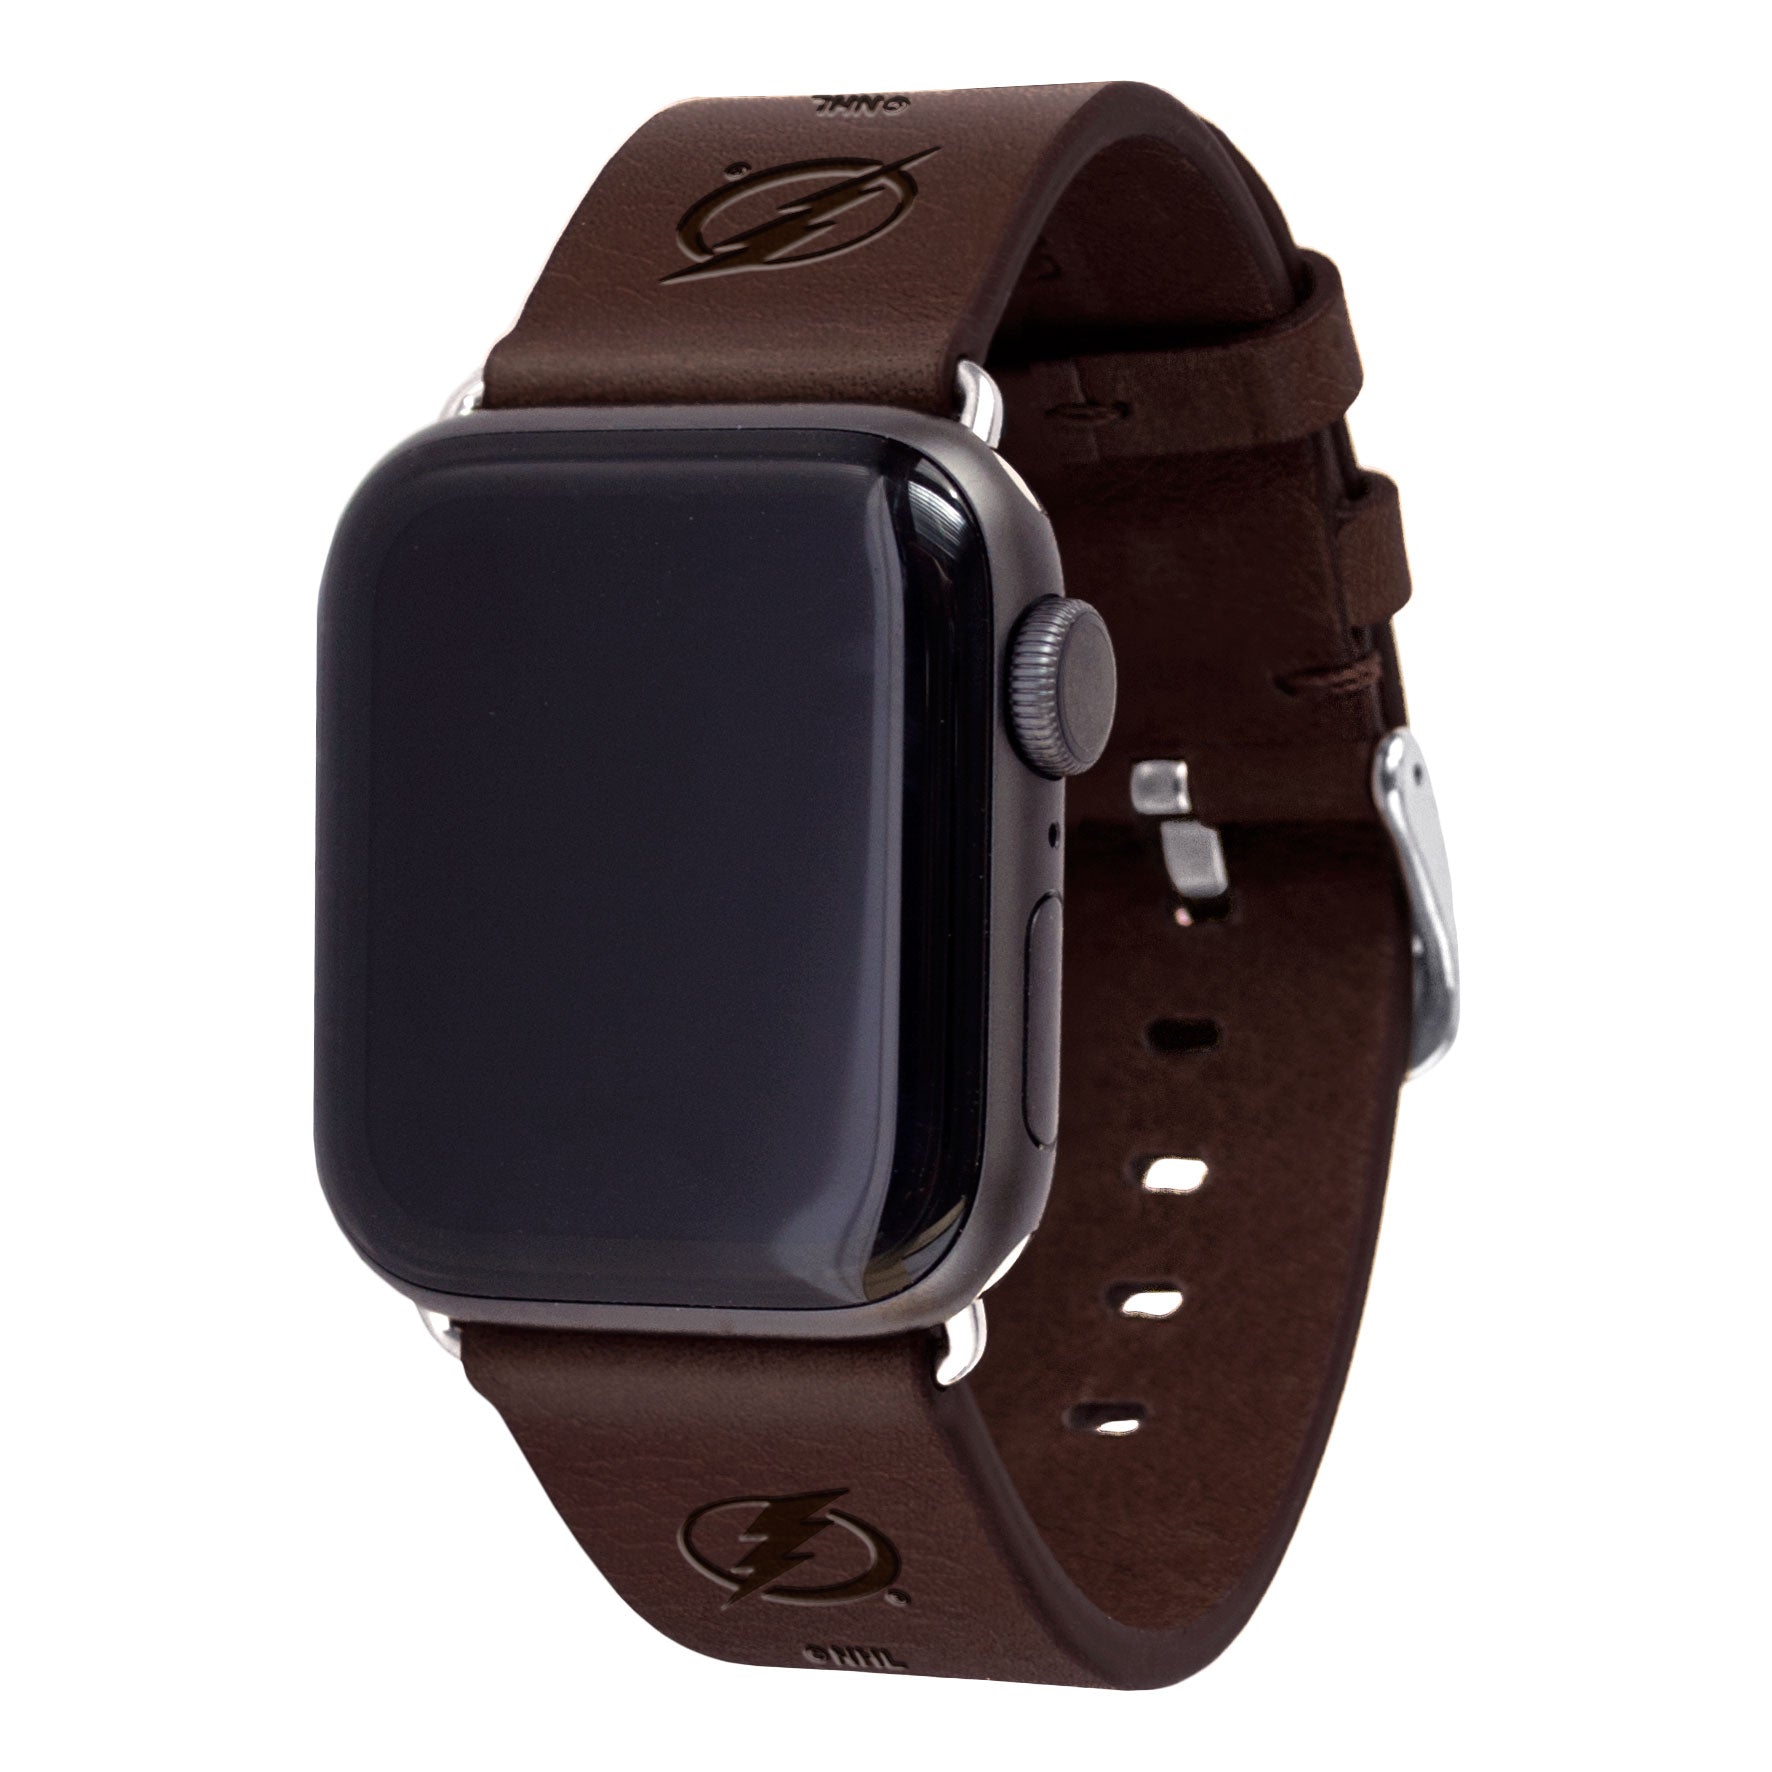 Tampa Bay Lightning Leather Apple Watch Band - AffinityBands